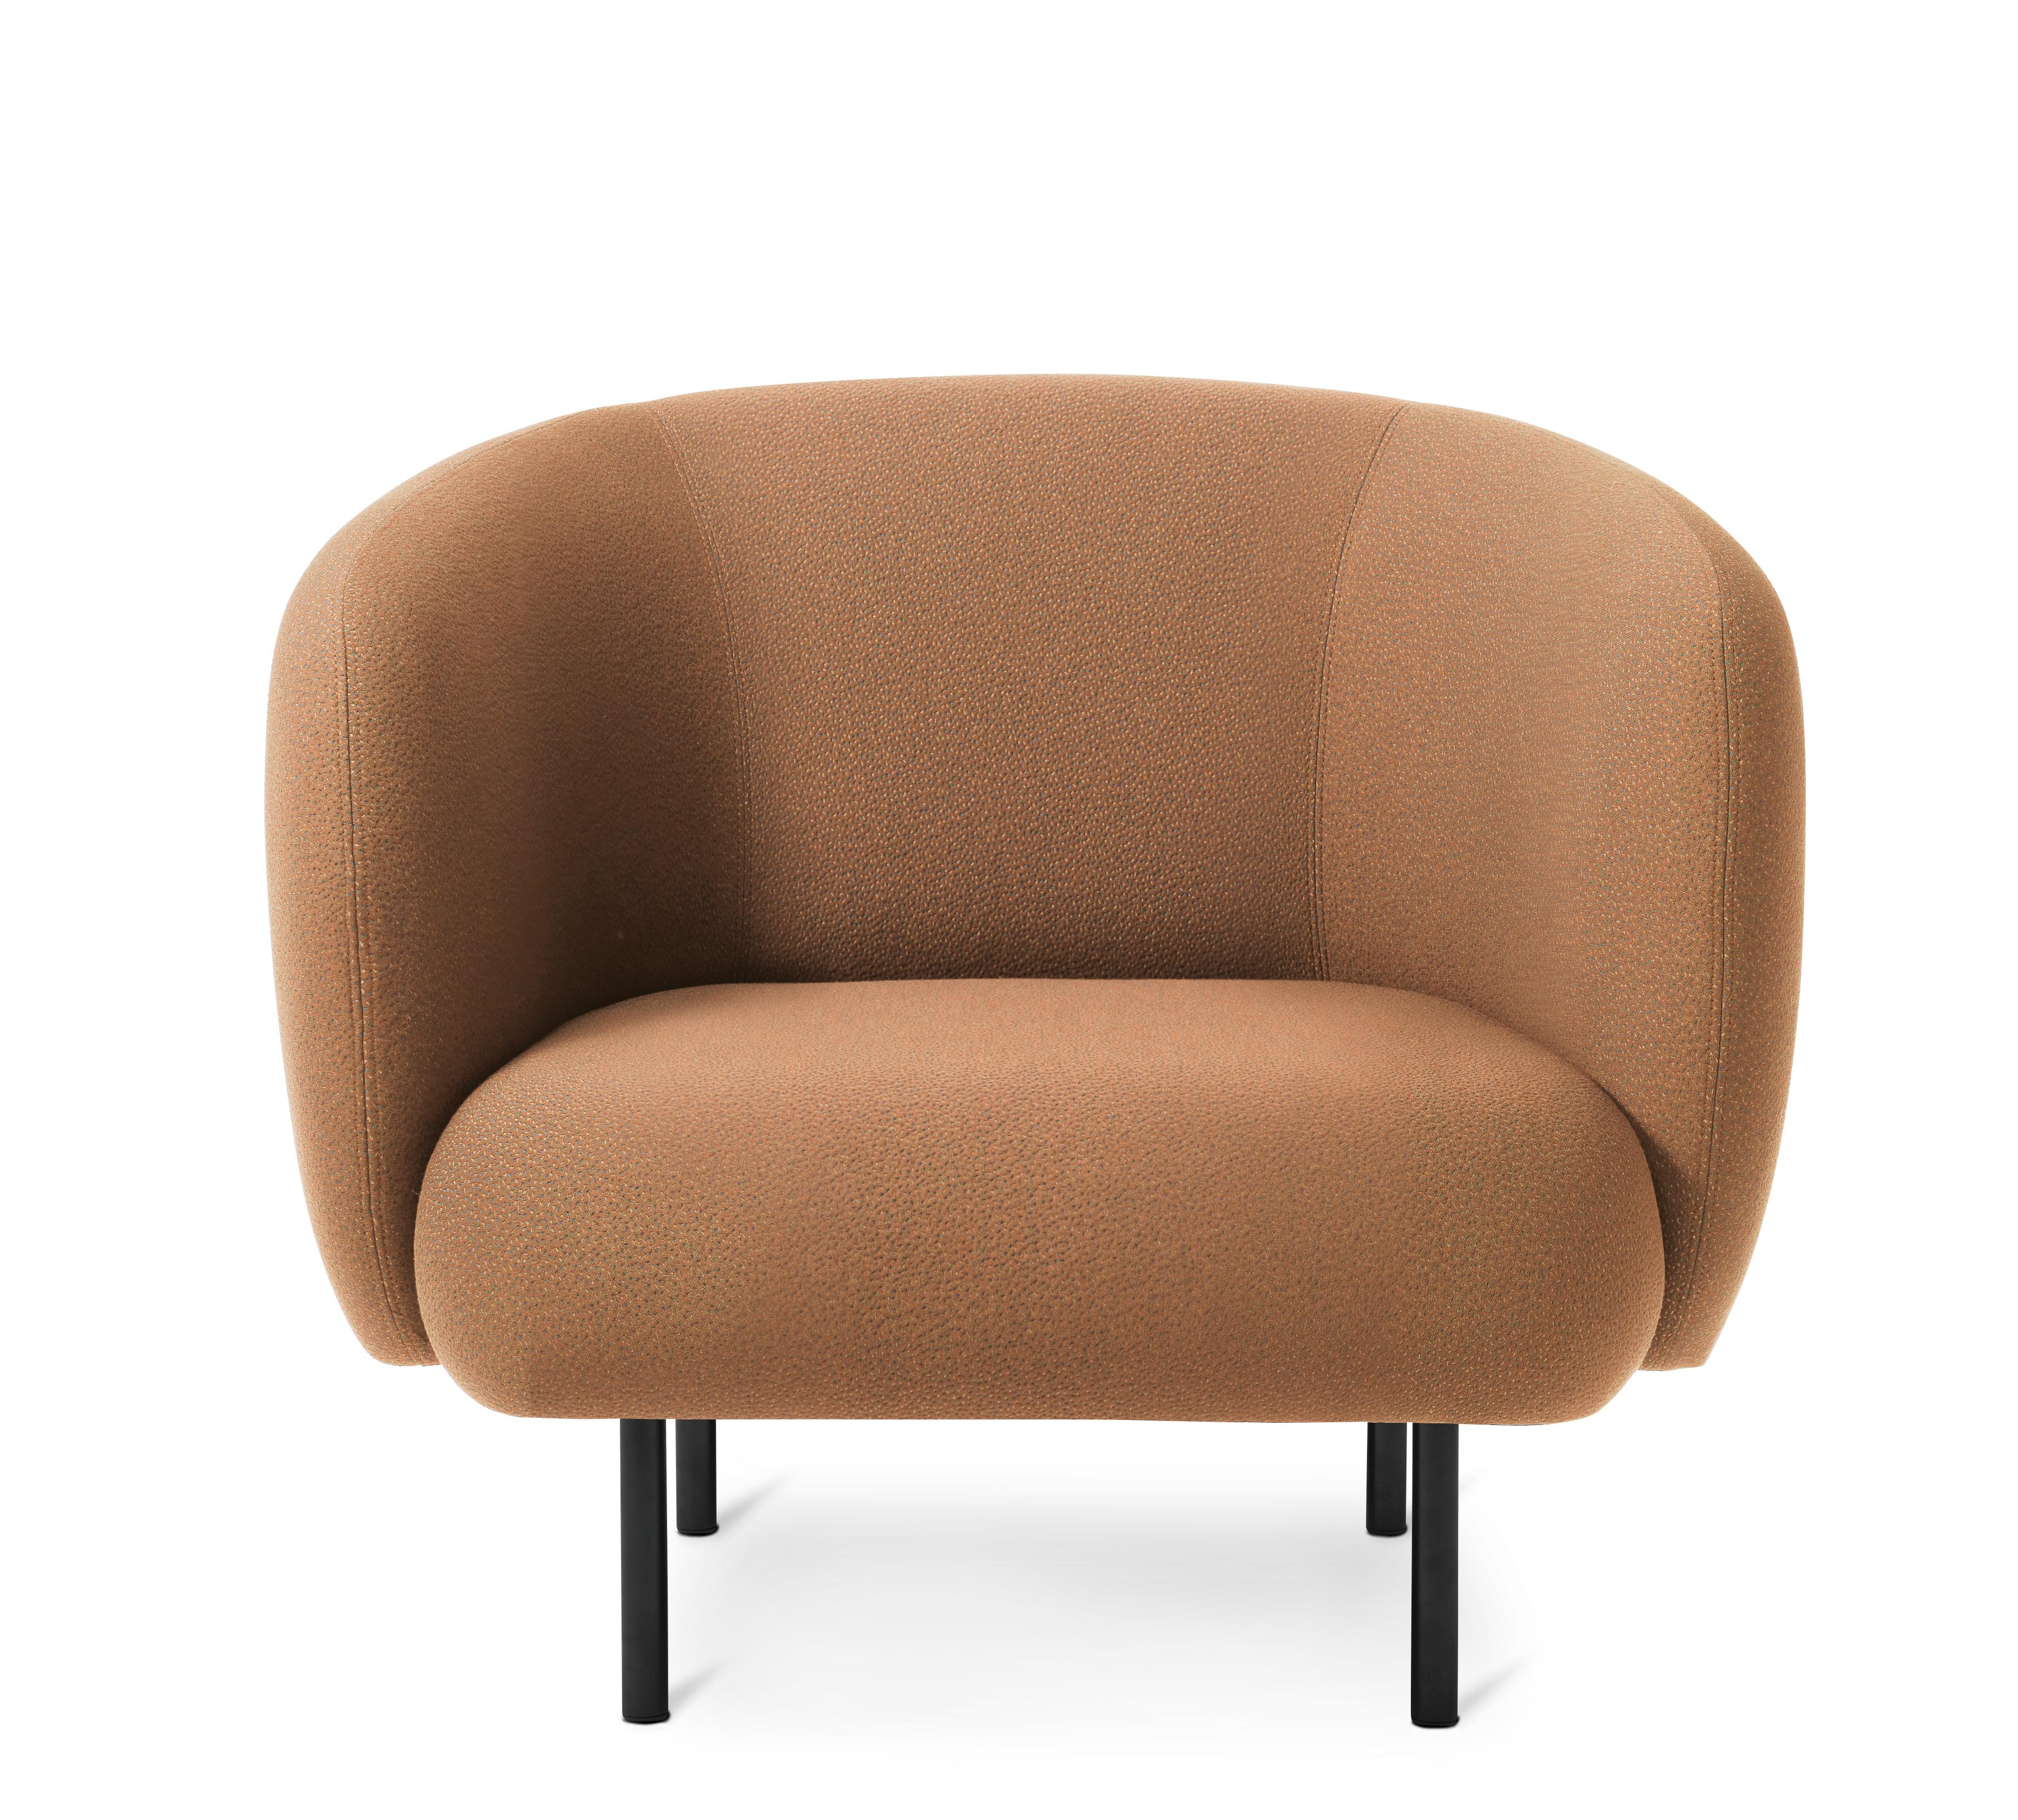 For Sale: Beige (Sprinkles 254) Cape Lounge Chair, by Charlotte Høncke from Warm Nordic